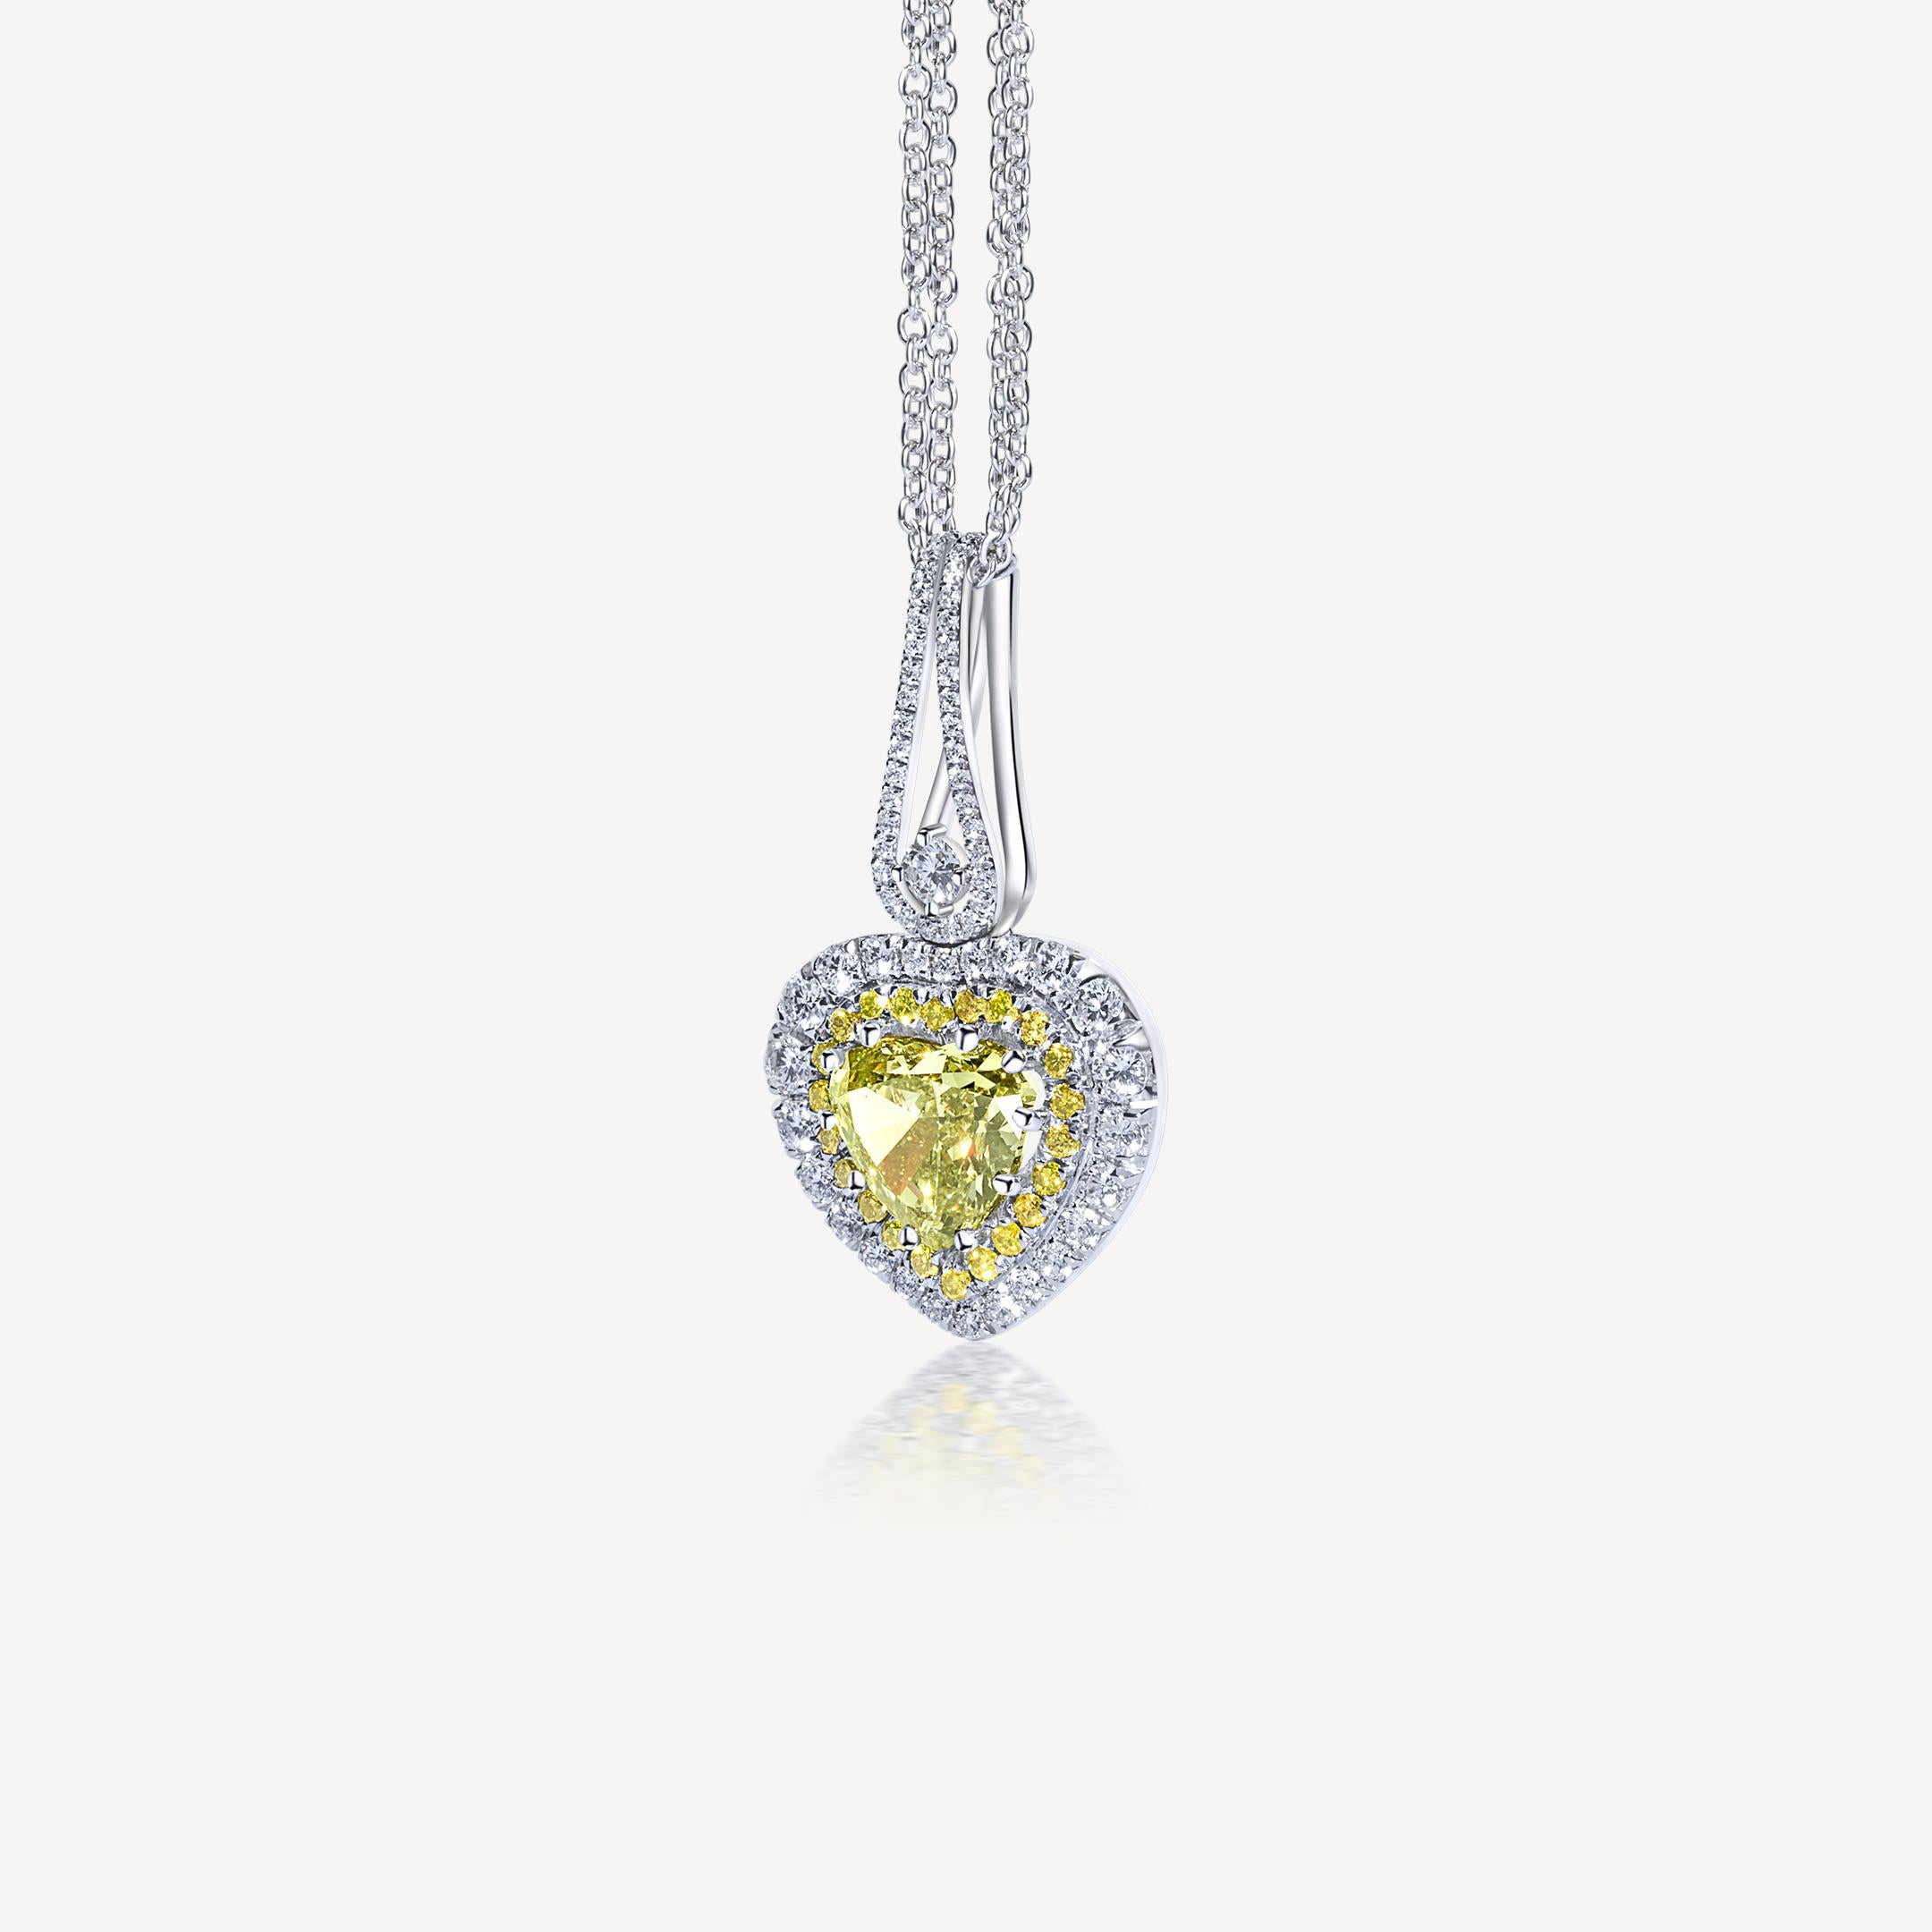 Necklace in white gold 18Kt 16.61 gr with Heart Shape Diamond Fancy Deep Brownish Greenish Yellow VVS2 Clarity 4.02 ct and Round Diamonds Fancy Yellow and G color VS clarity in total 1.95 ct
This anniversary collection represents a tribute to the